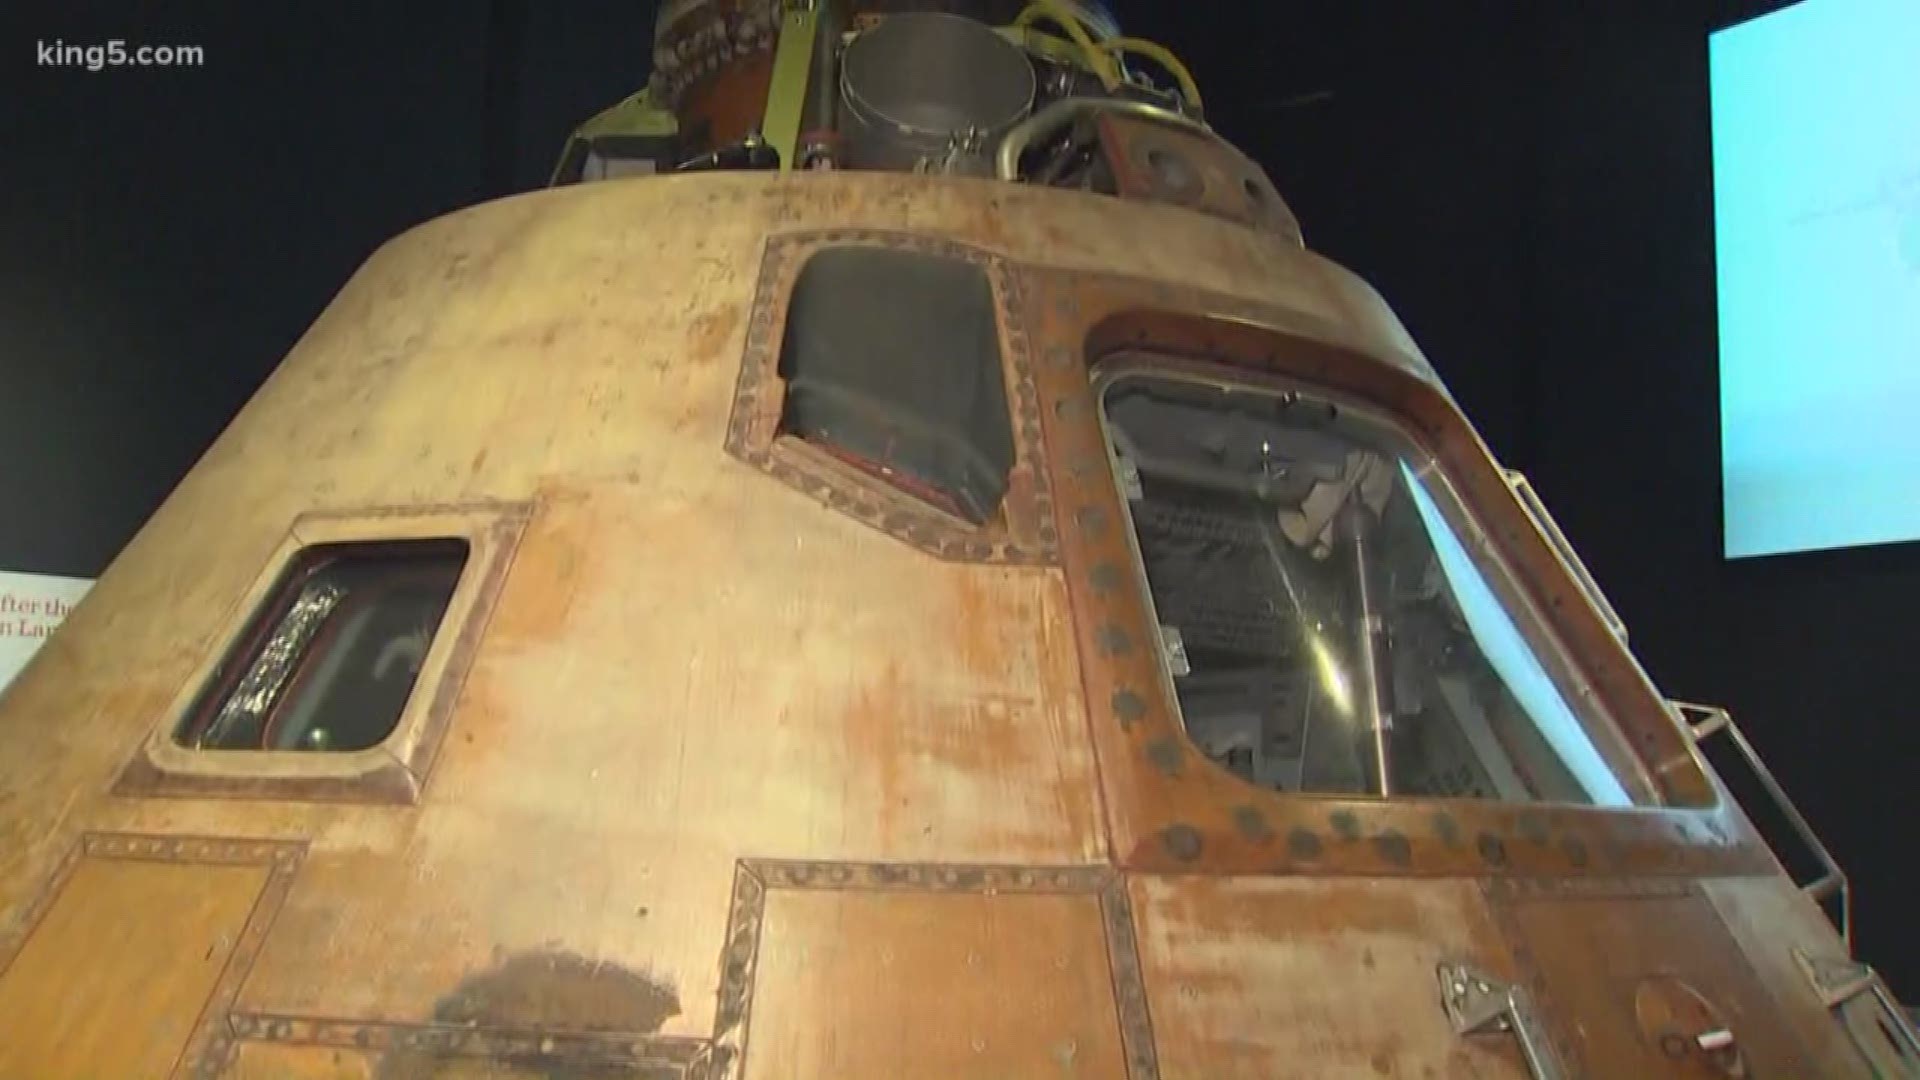 KING 5's Kierra Elfalan goes inside the Museum of Flight's Apollo 11 exhibit to see some of the actual spacecraft and equipment used to accomplish the historic moon landing.